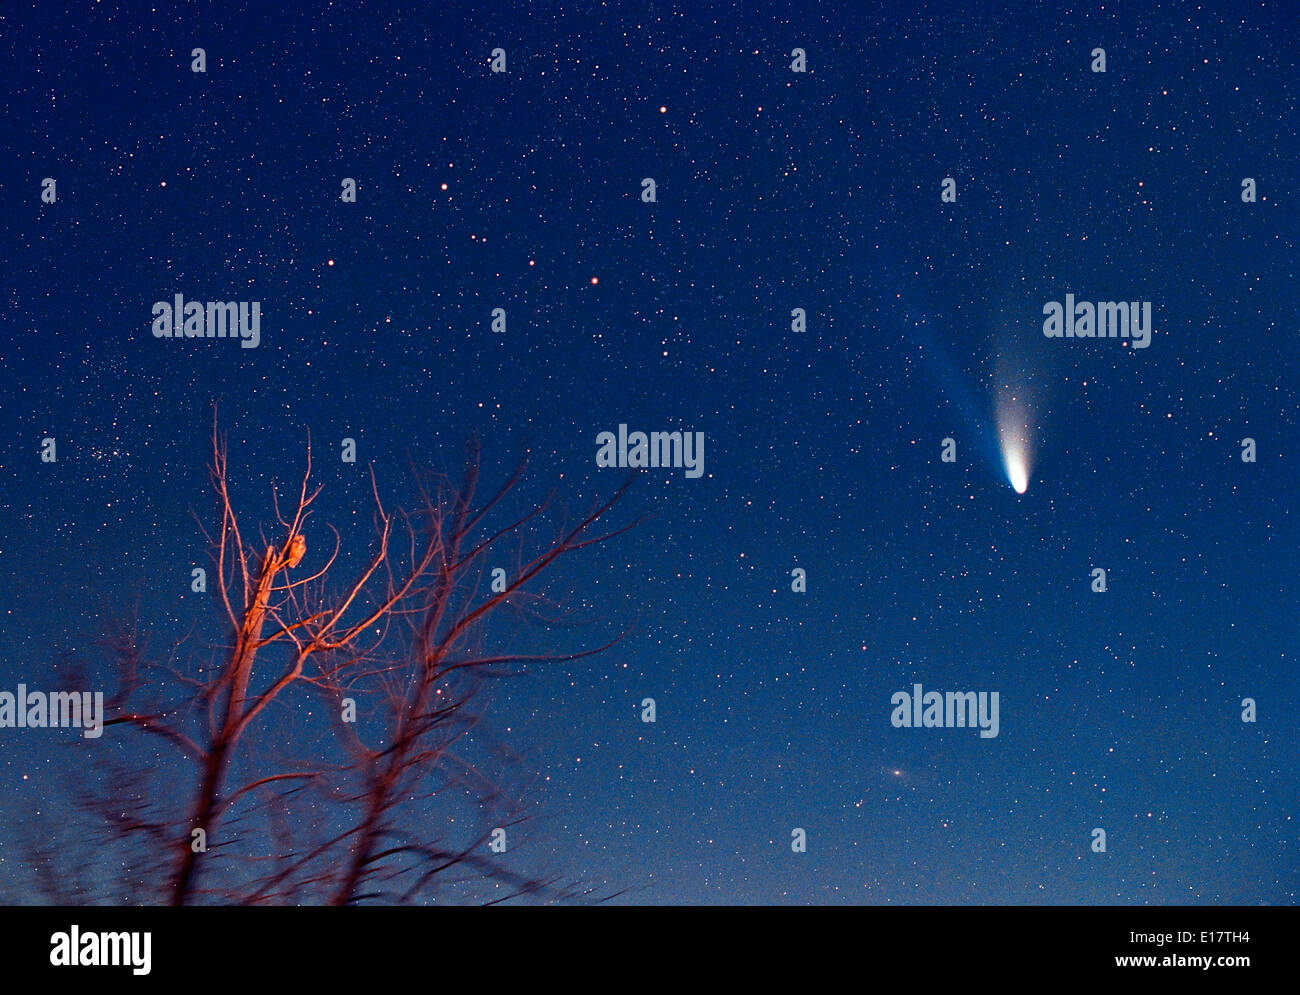 Comet Hale-Bopp with Owl March 21, 1997 early morning Kodak PJM-2 film Tracked exposure of about 3 minutes 28mm lens at f/2.8 Ow Stock Photo